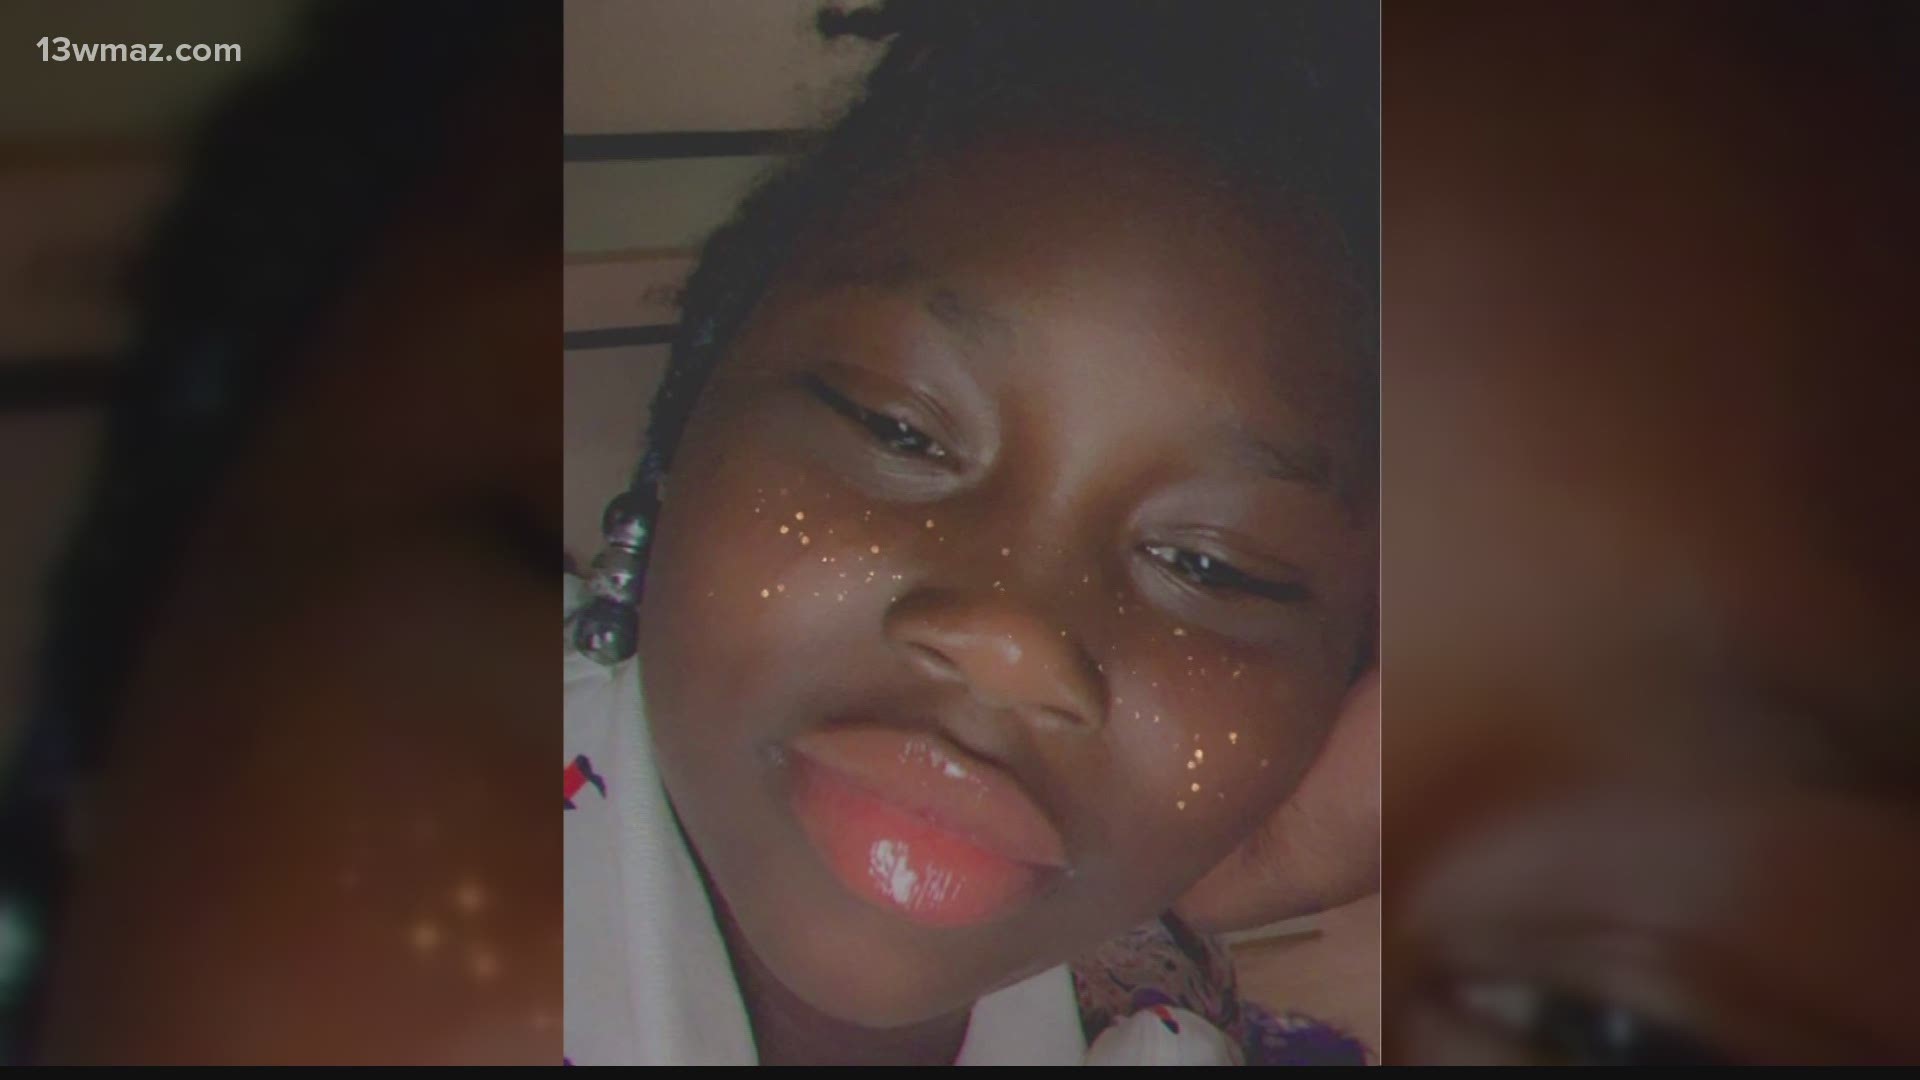 The Bibb County Sheriff's Office is investigating after a 10-year-old girl was shot in the back while she was inside her home Wednesday night